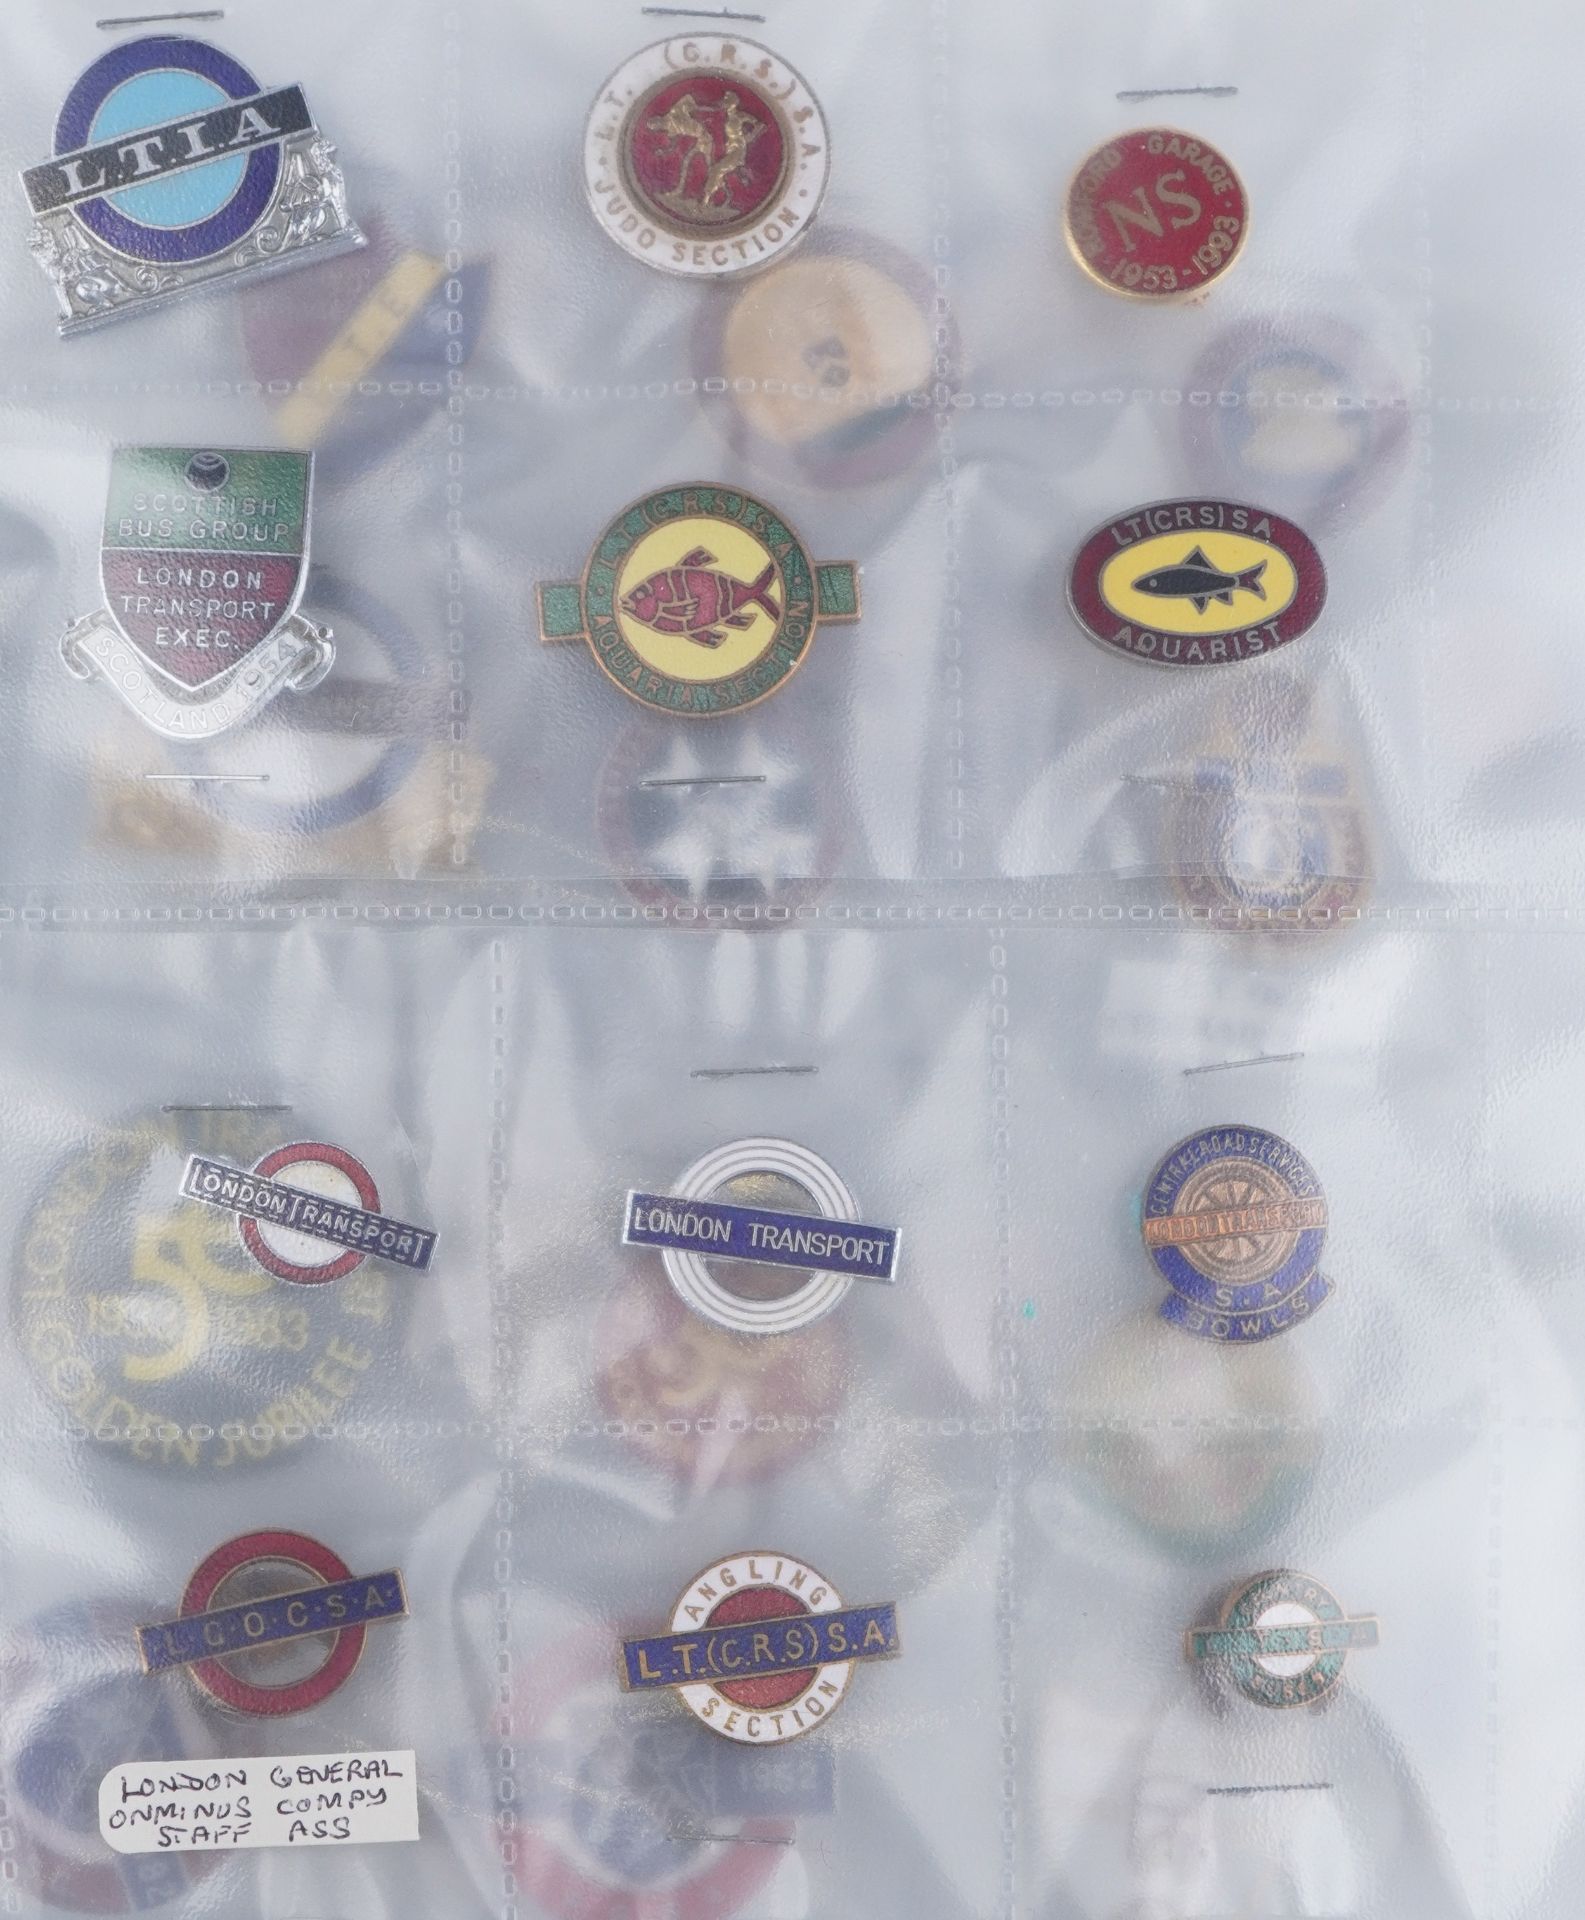 Large collection of automobilia and sporting interest badges and jewels, some arranged in an album - Image 8 of 14